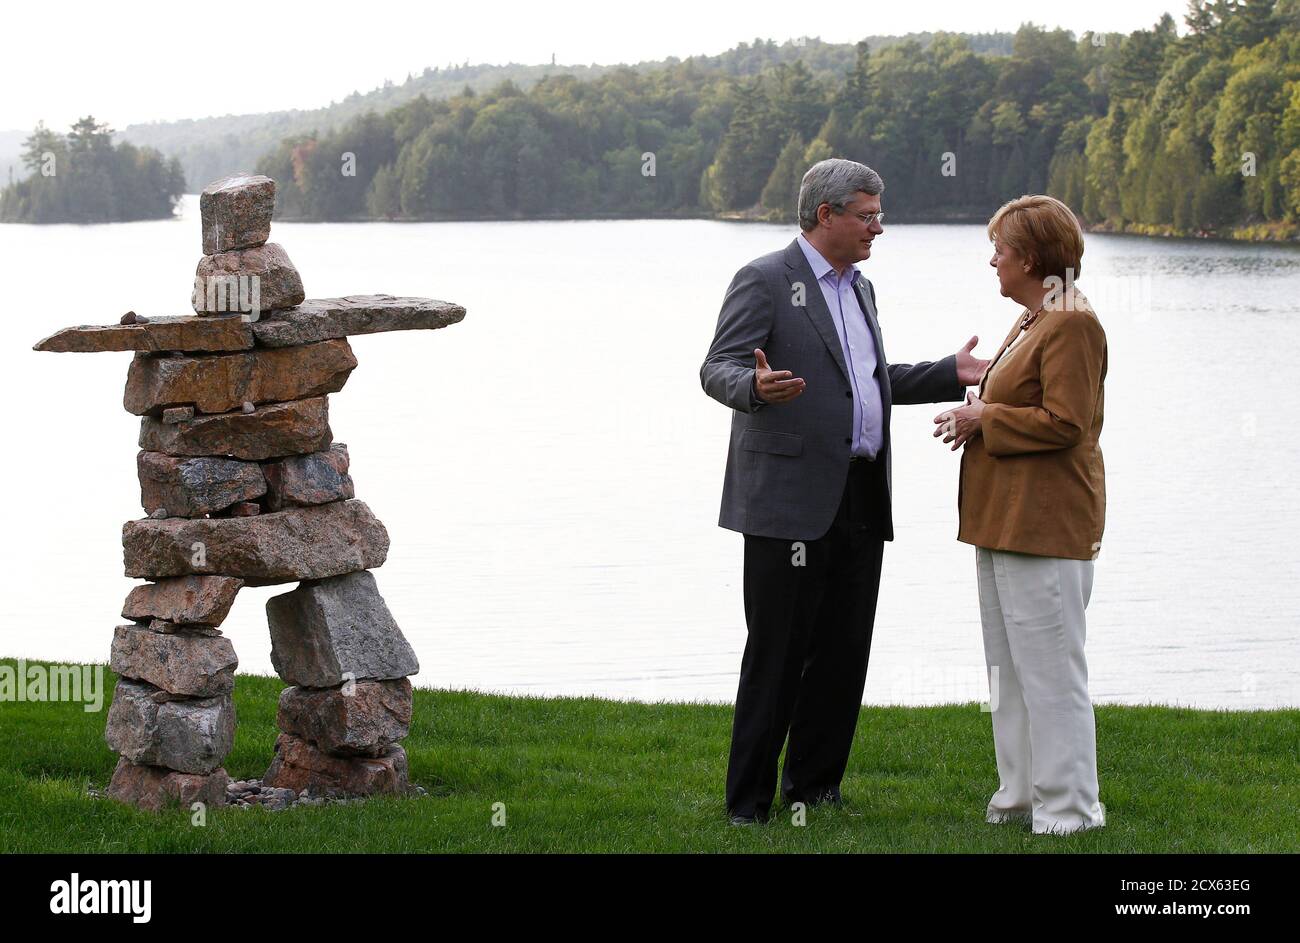 Canada's Prime Minister Stephen Harper (L) talks with Germany's Chancellor Angela Merkel at Harrington Lake, Harper's official country retreat, in Gatineau Park, Quebec August 15, 2012. Merkel is on an official visit to Canada from August 15-16. Pictured at left is a traditional Inuit inukshuk stone landmark.       REUTERS/Chris Wattie       (CANADA - Tags: POLITICS TPX IMAGES OF THE DAY) Stock Photo